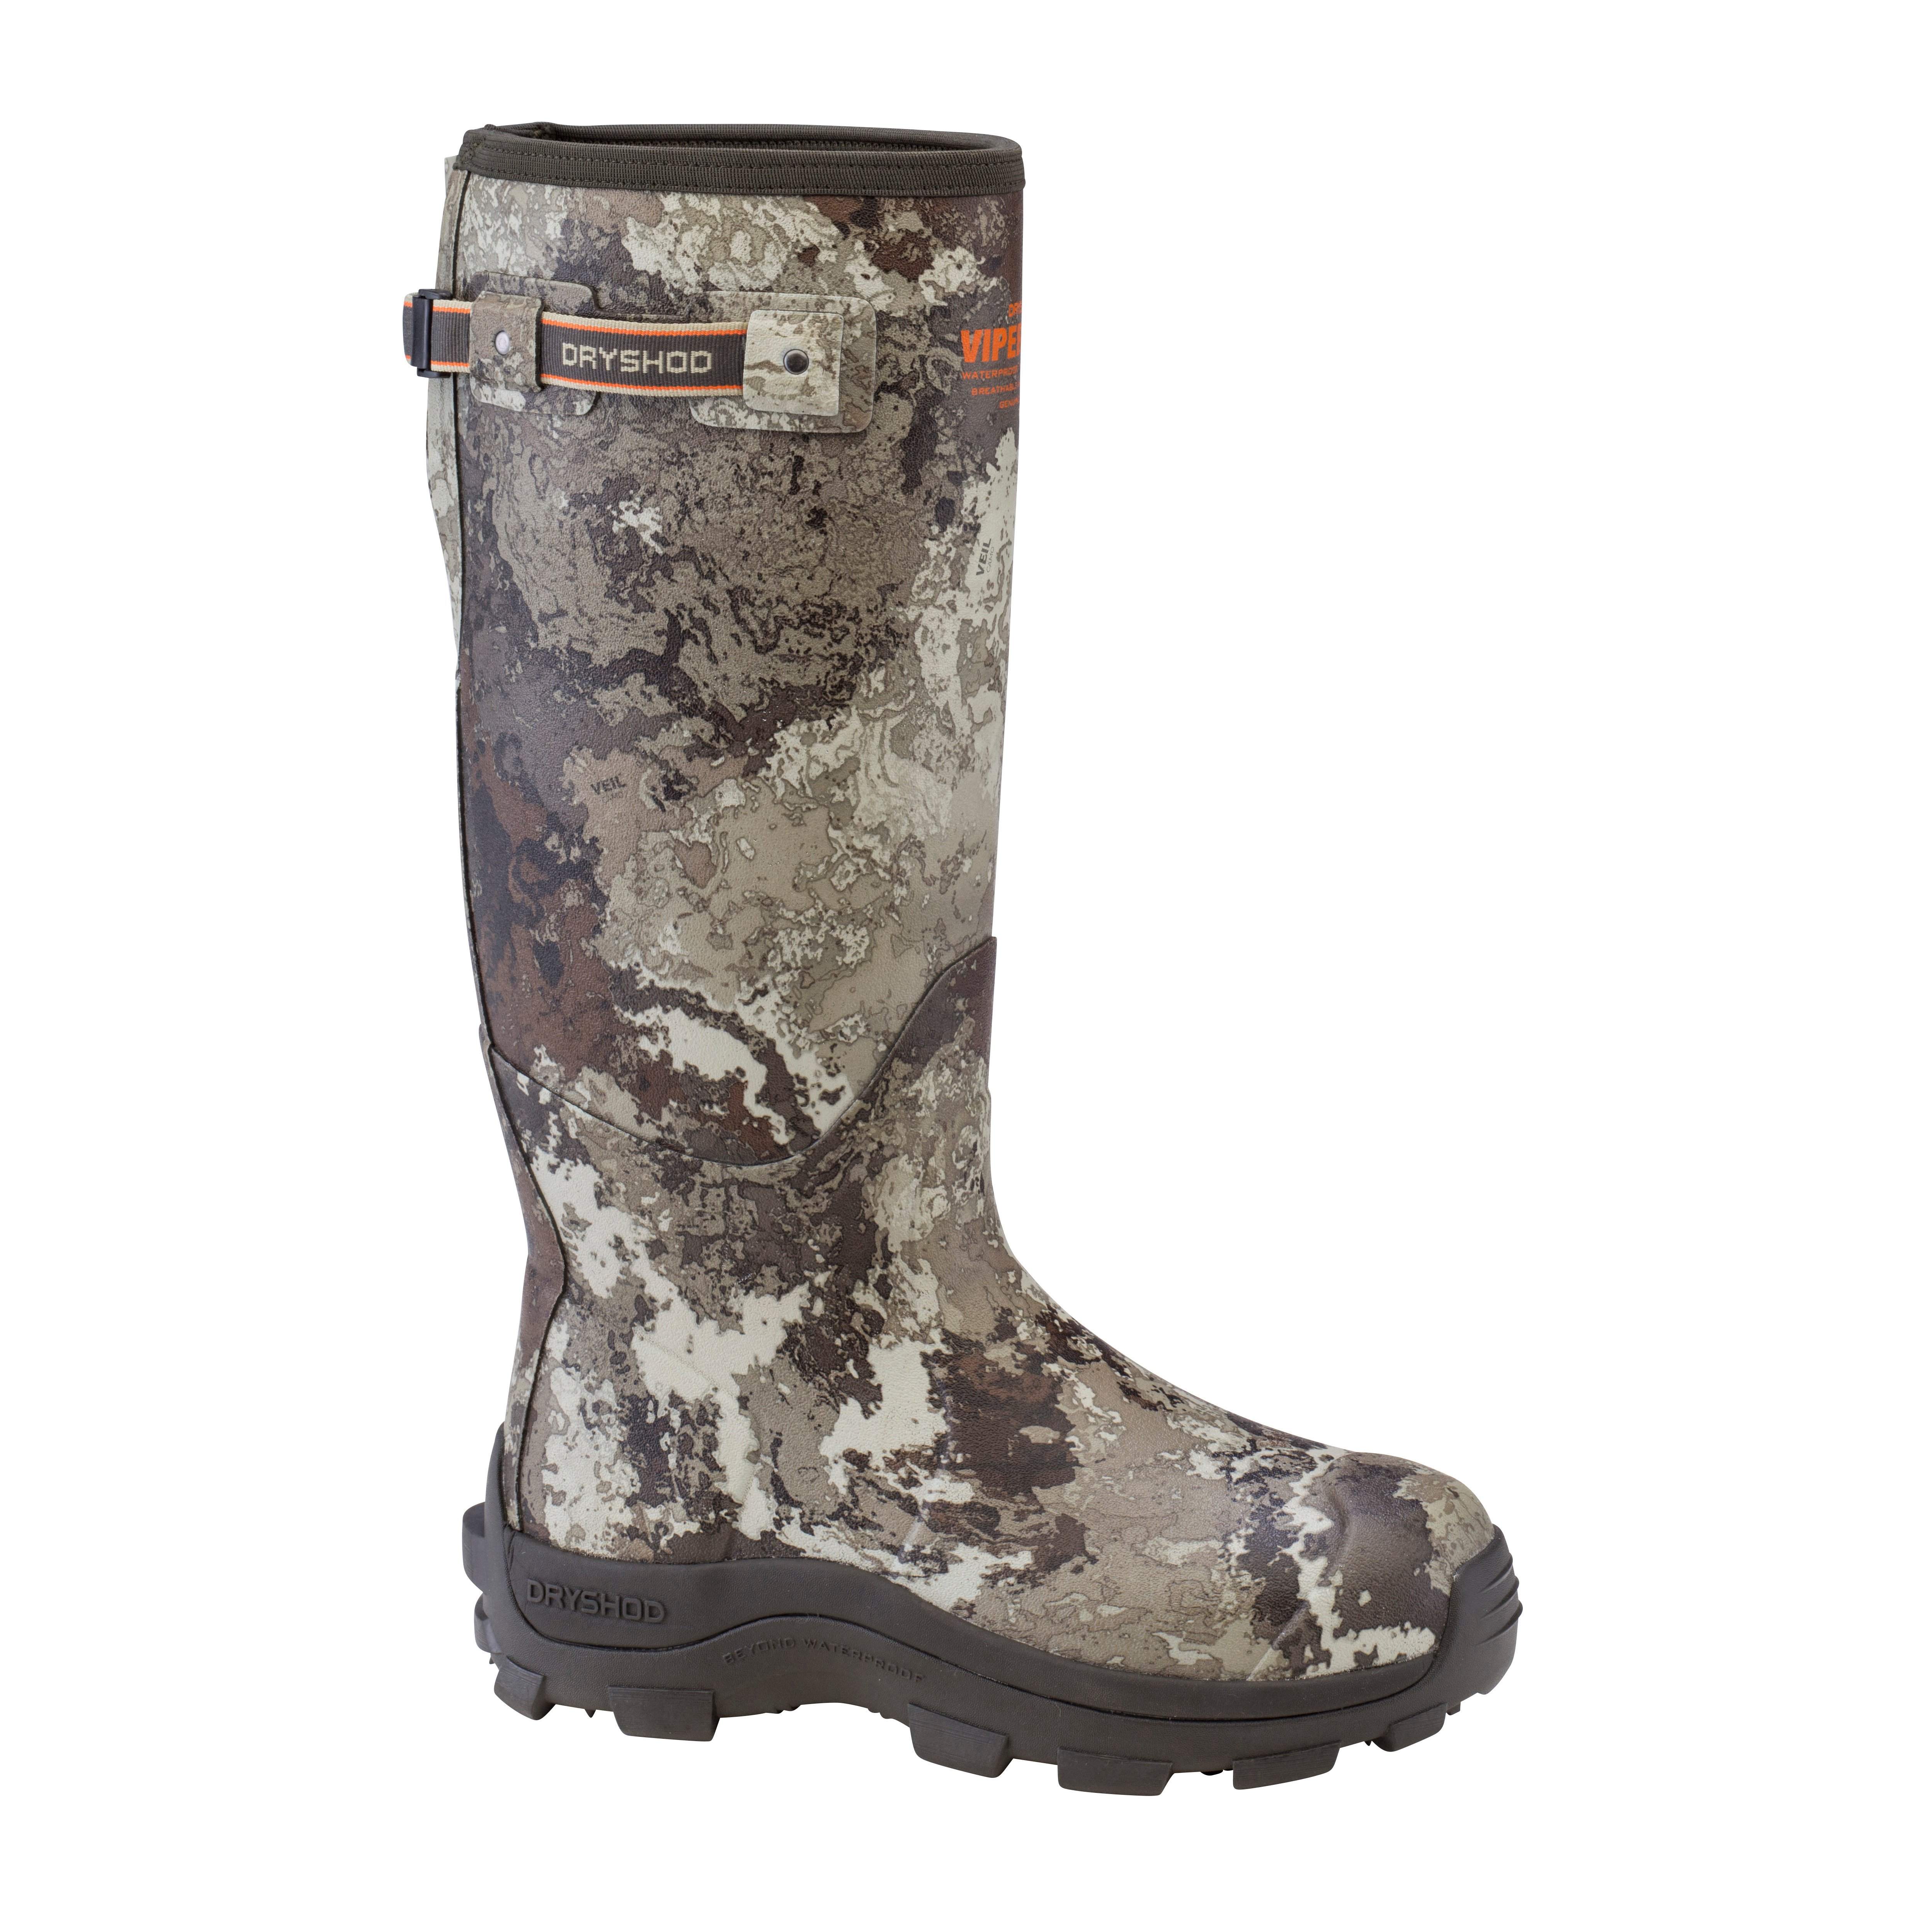 Dryshod ViperStop Snake Hunting Boot VEIL Camo With Gusset Size 14  VPS-MH-CM 